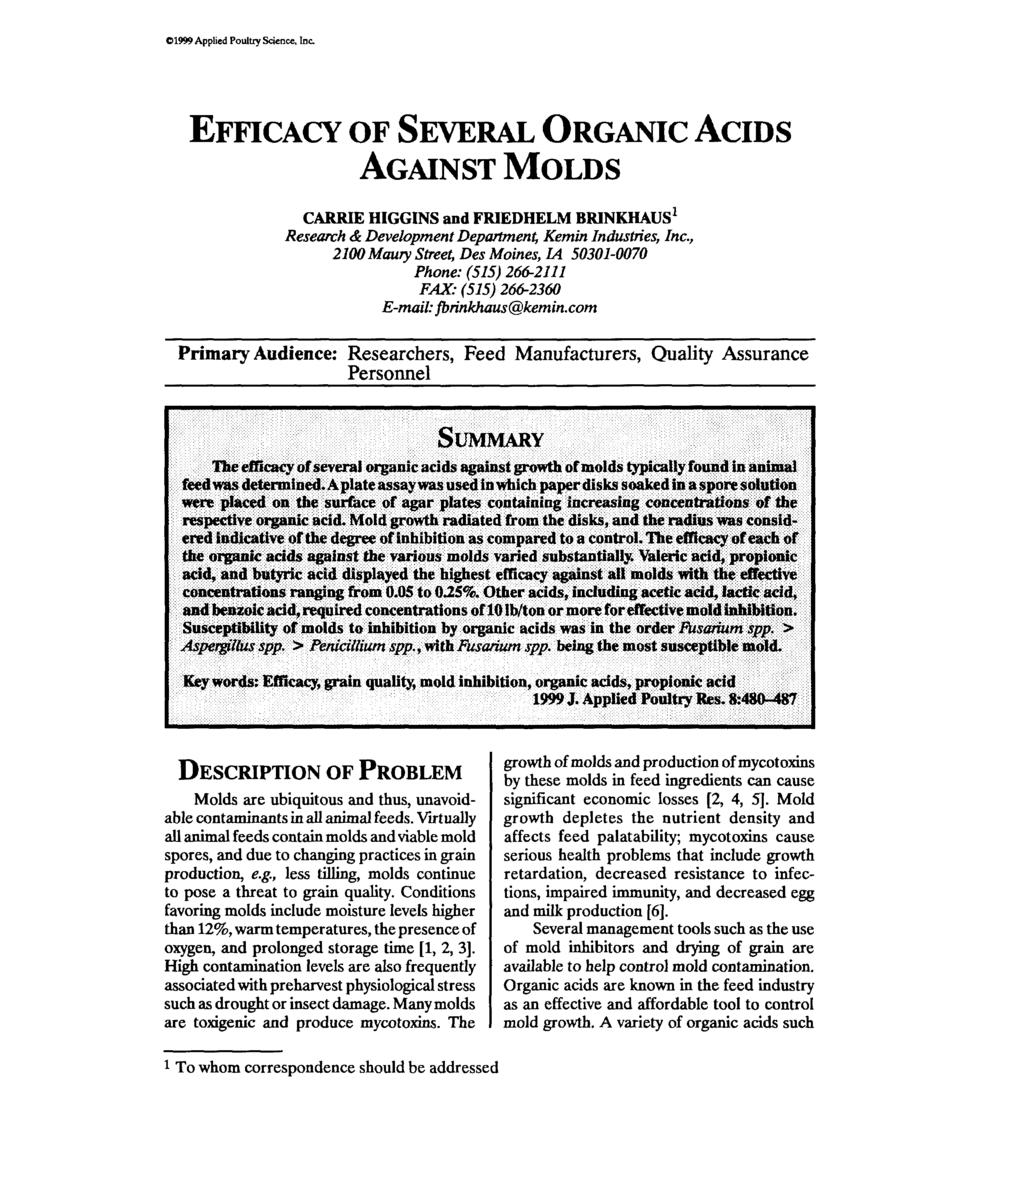 01999 Applied Poultq Science. lac. EFFICACY AGAINST MOLDS OF SEVERAL ORGANIC ACIDS CARRIE HIGGINS and FlUEDHELM BlUNKHAUS' Research & Development Department, Kemin Indusbies, Inc.